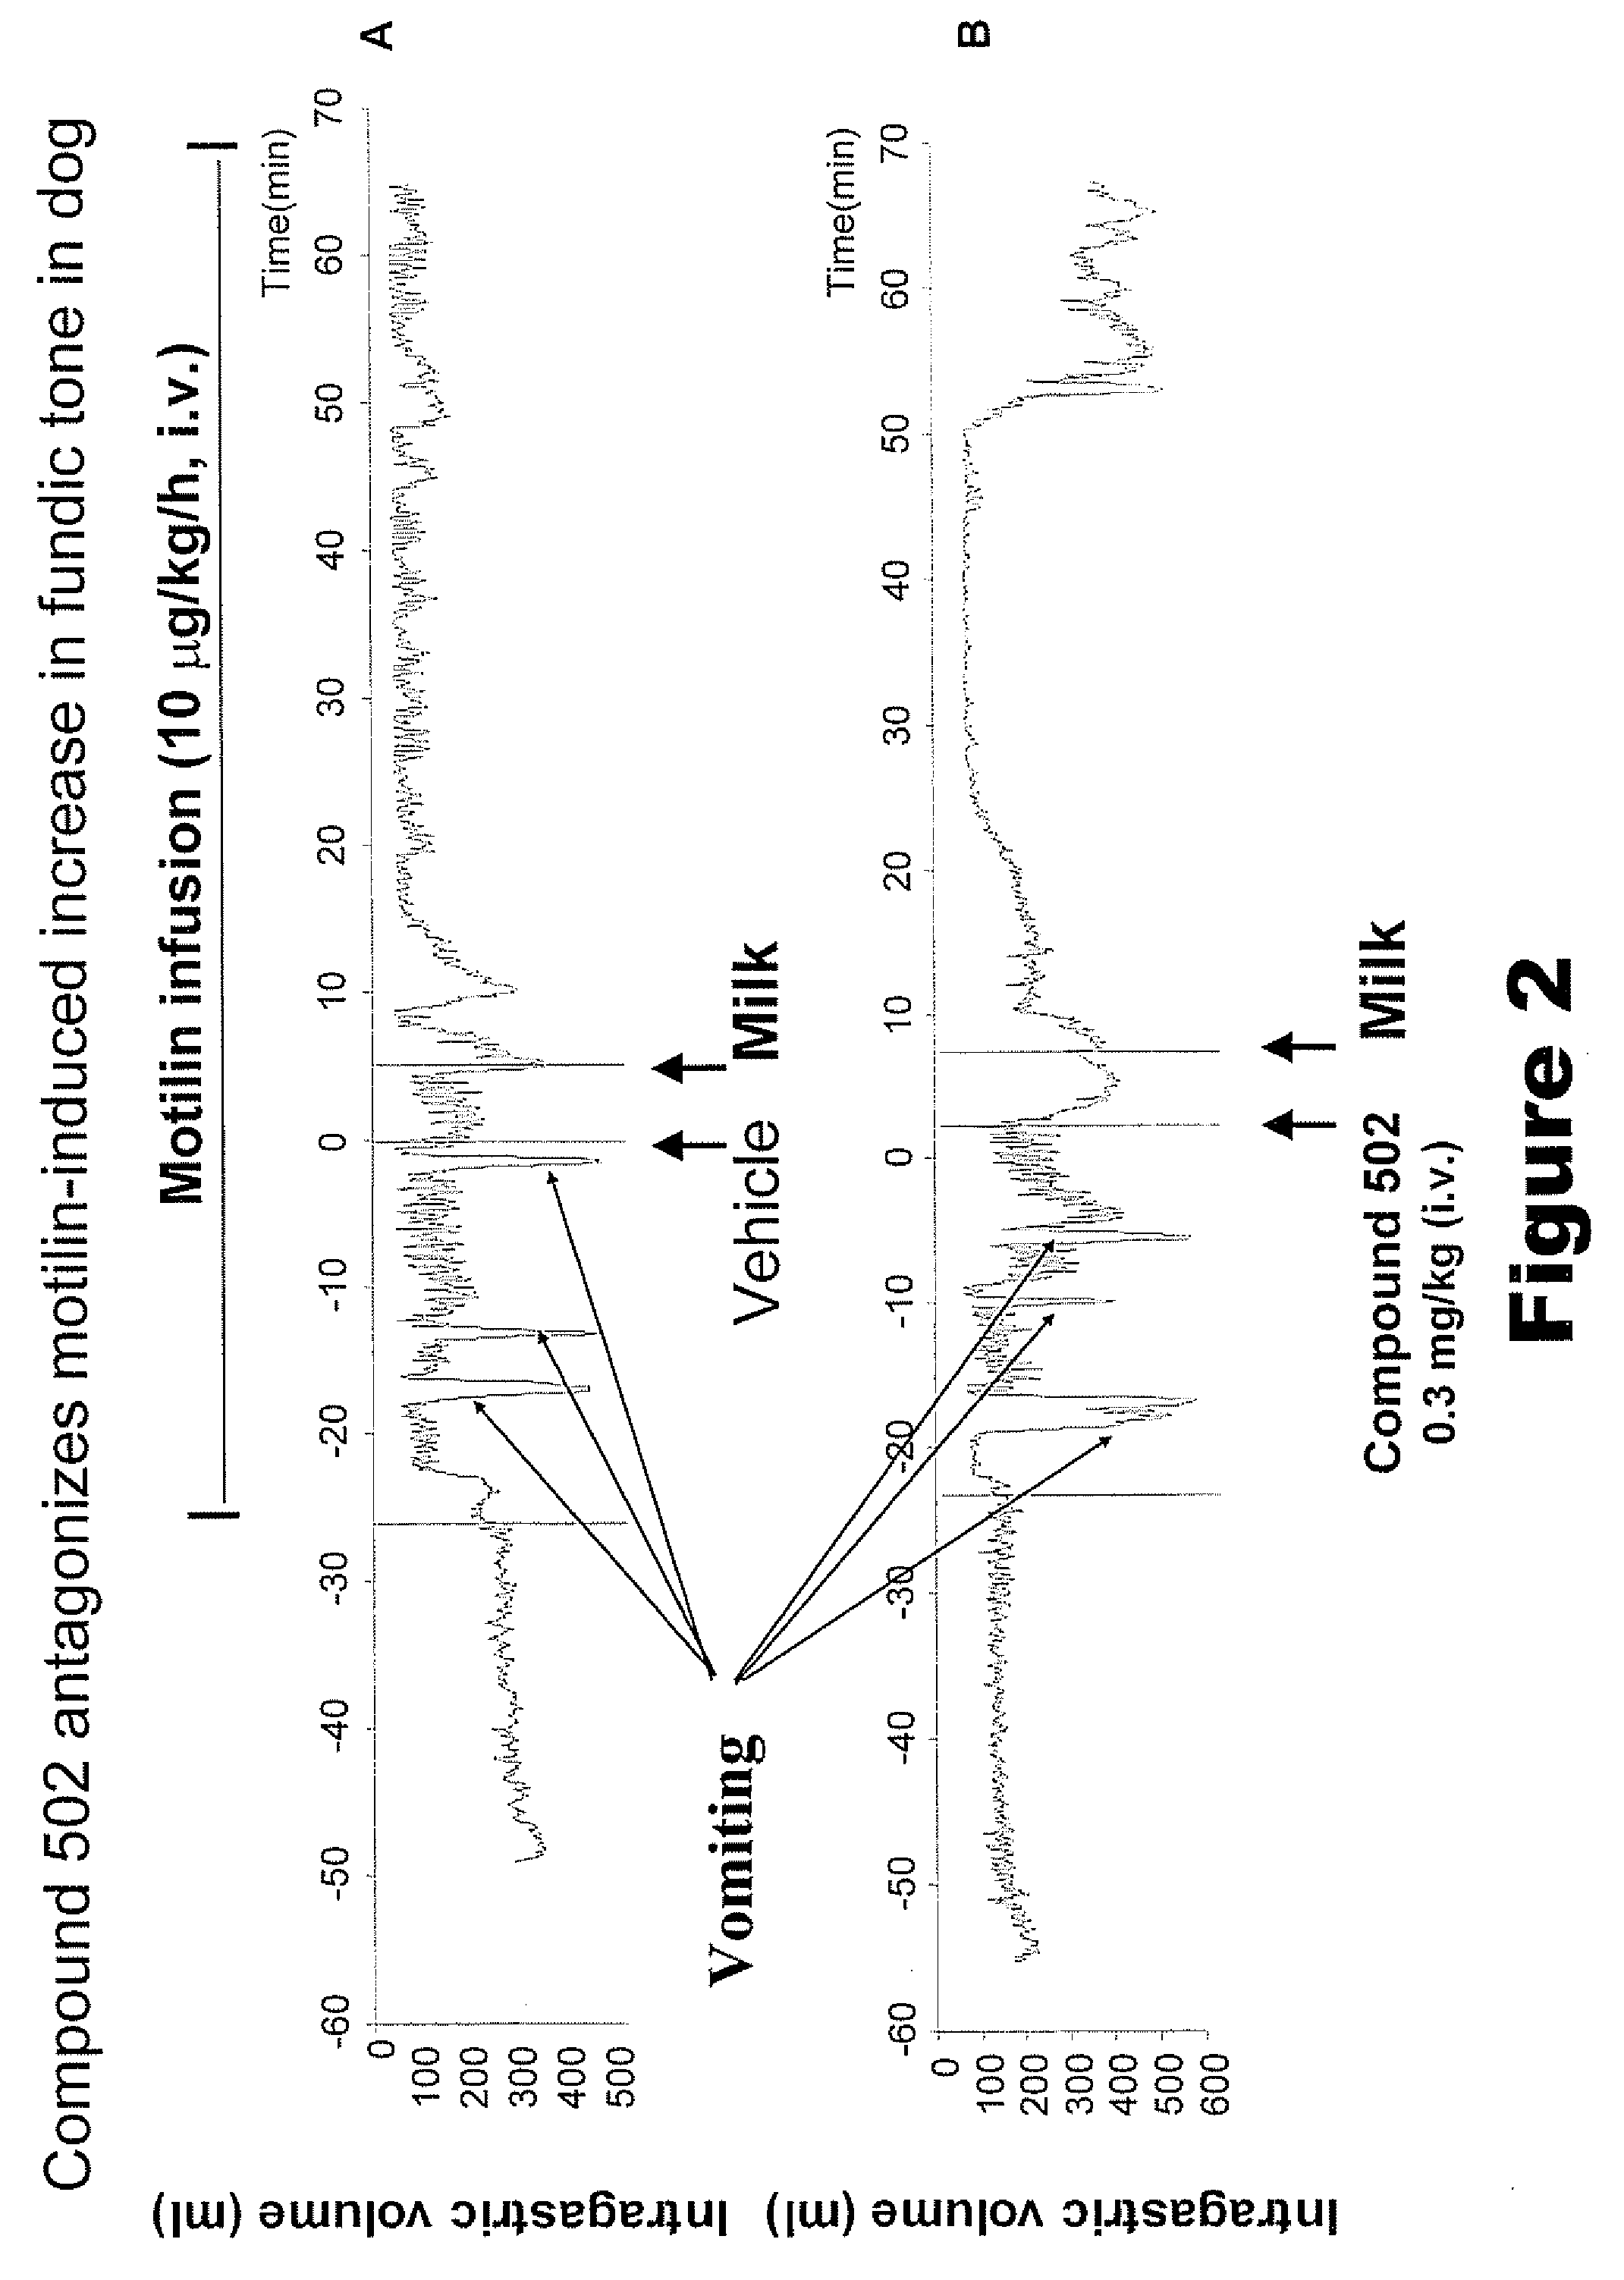 Macrocyclic antagonists of the motilin receptor for modulation of the migrating motor complex